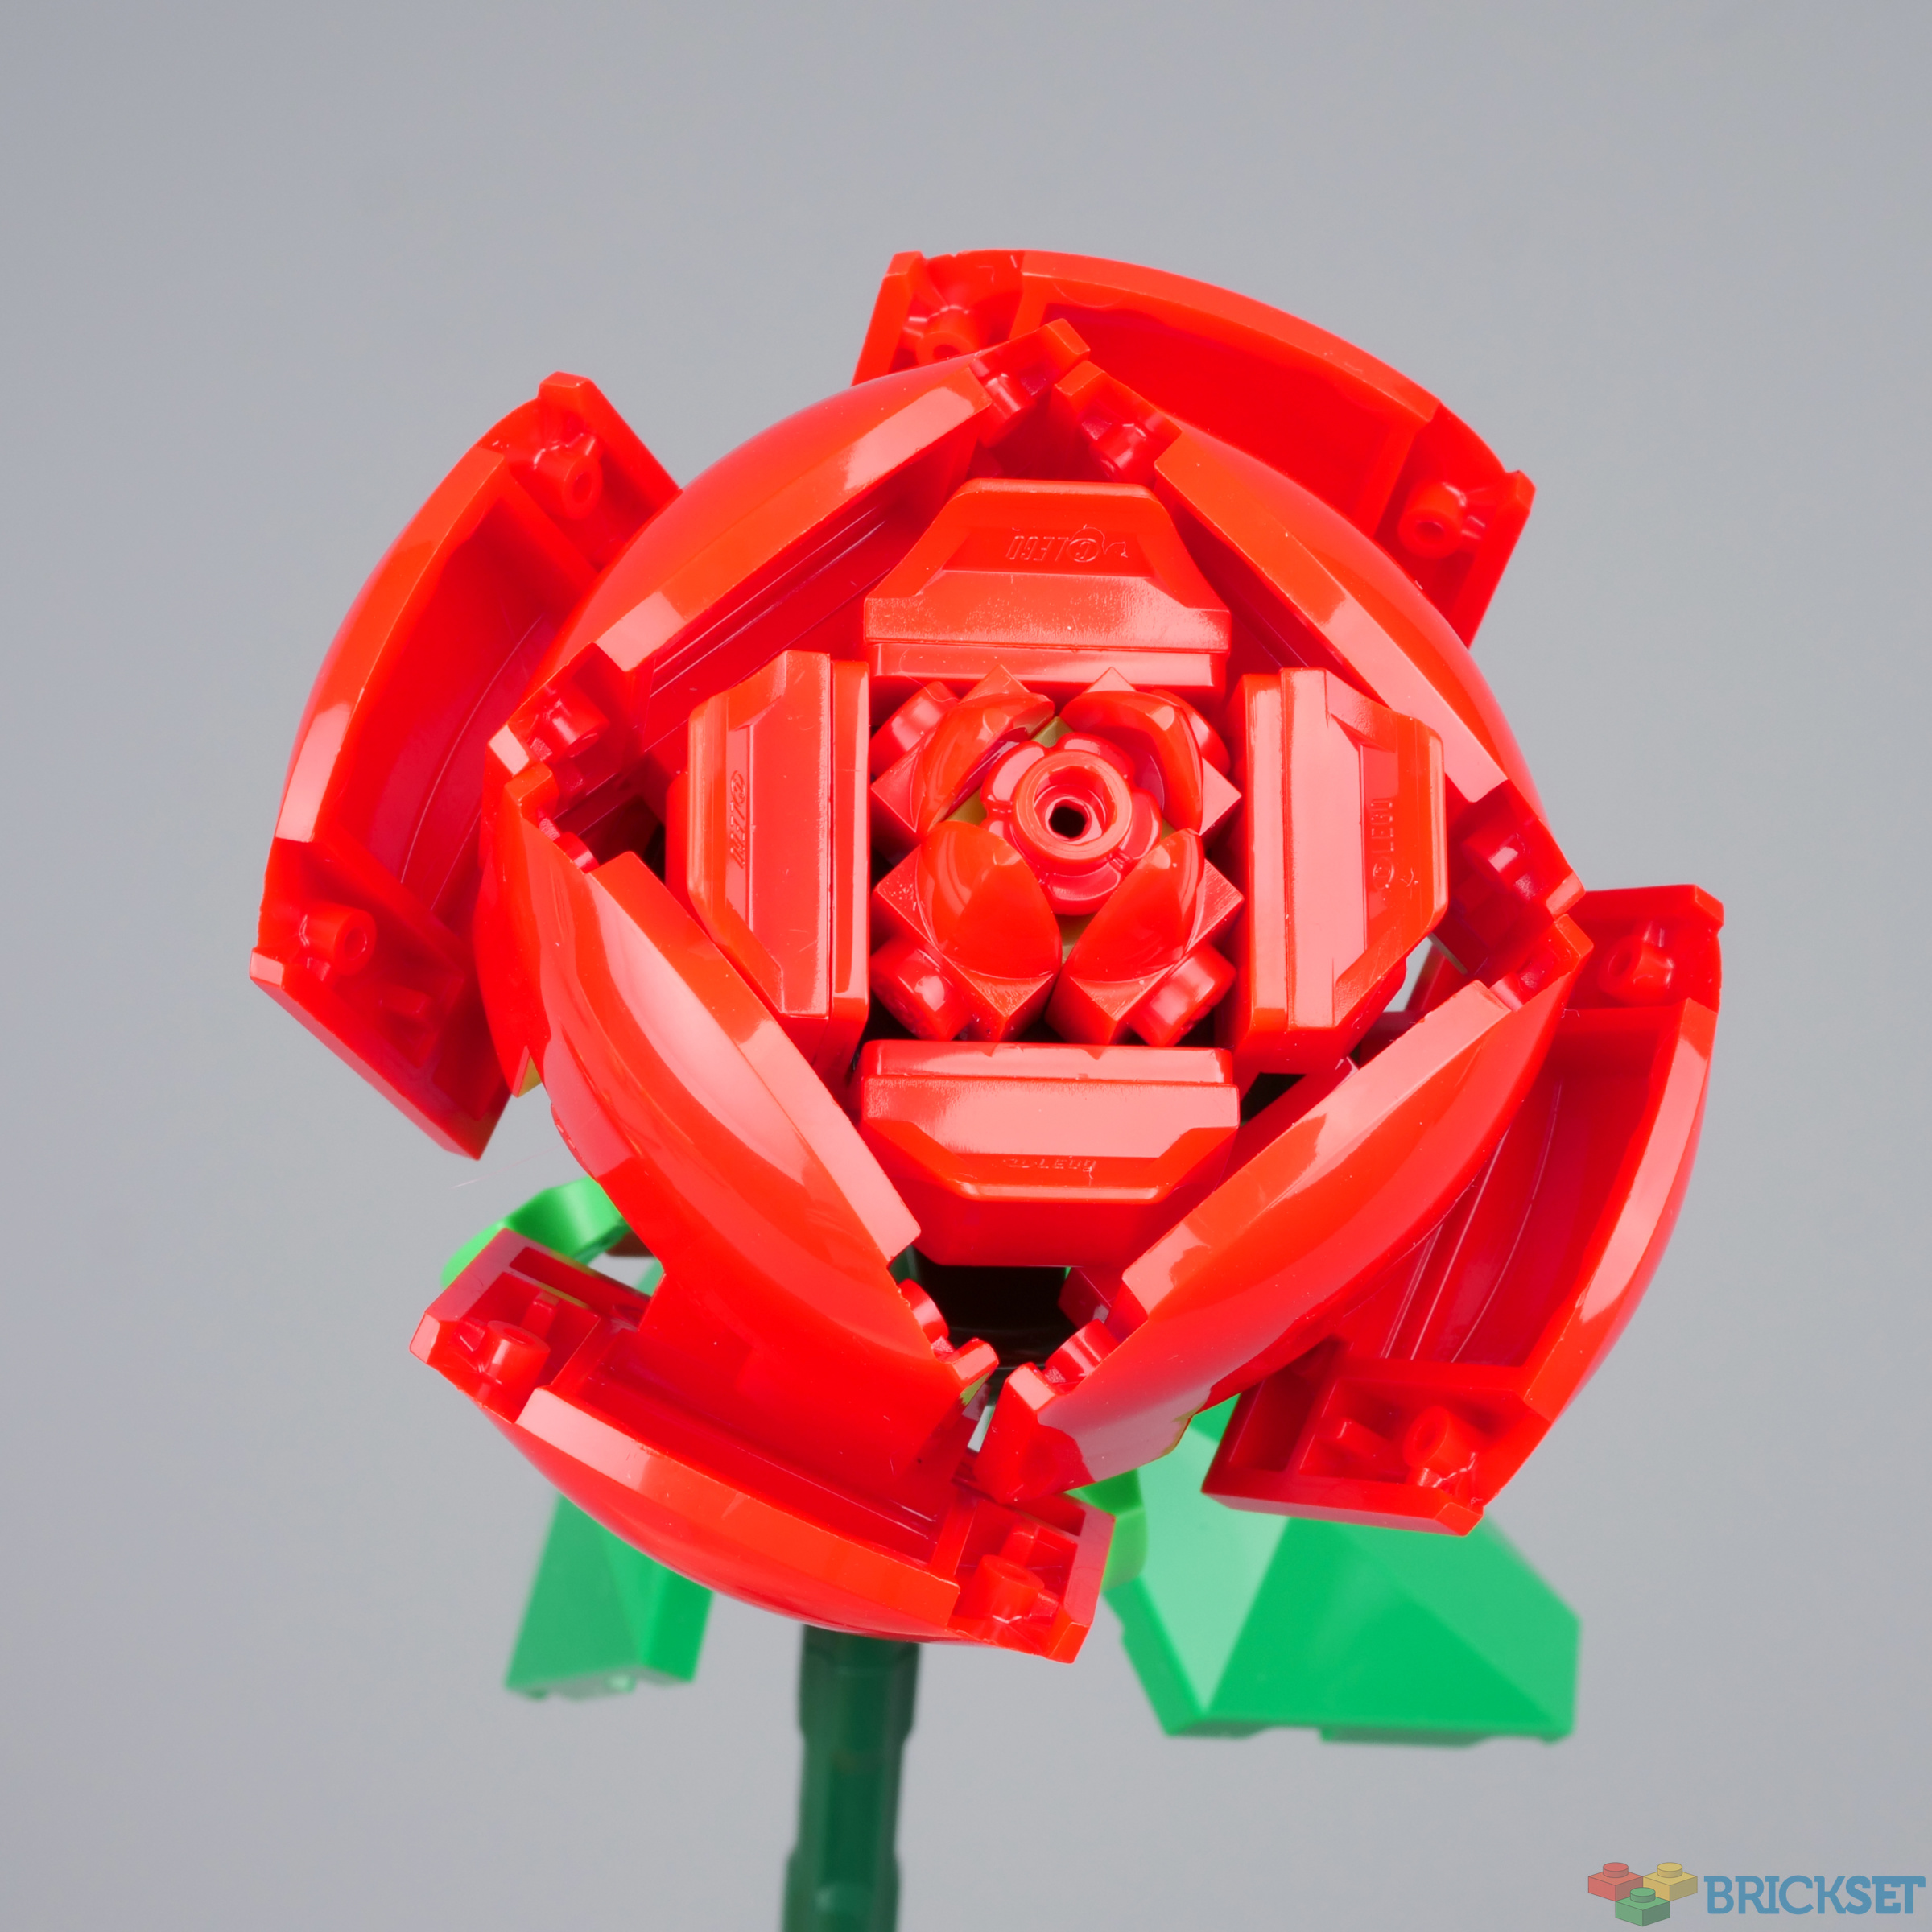 NEW IN BOX LEGO 40460 Botanical Red Roses Flower 🌹LIMITED EDITION🌹 NEW